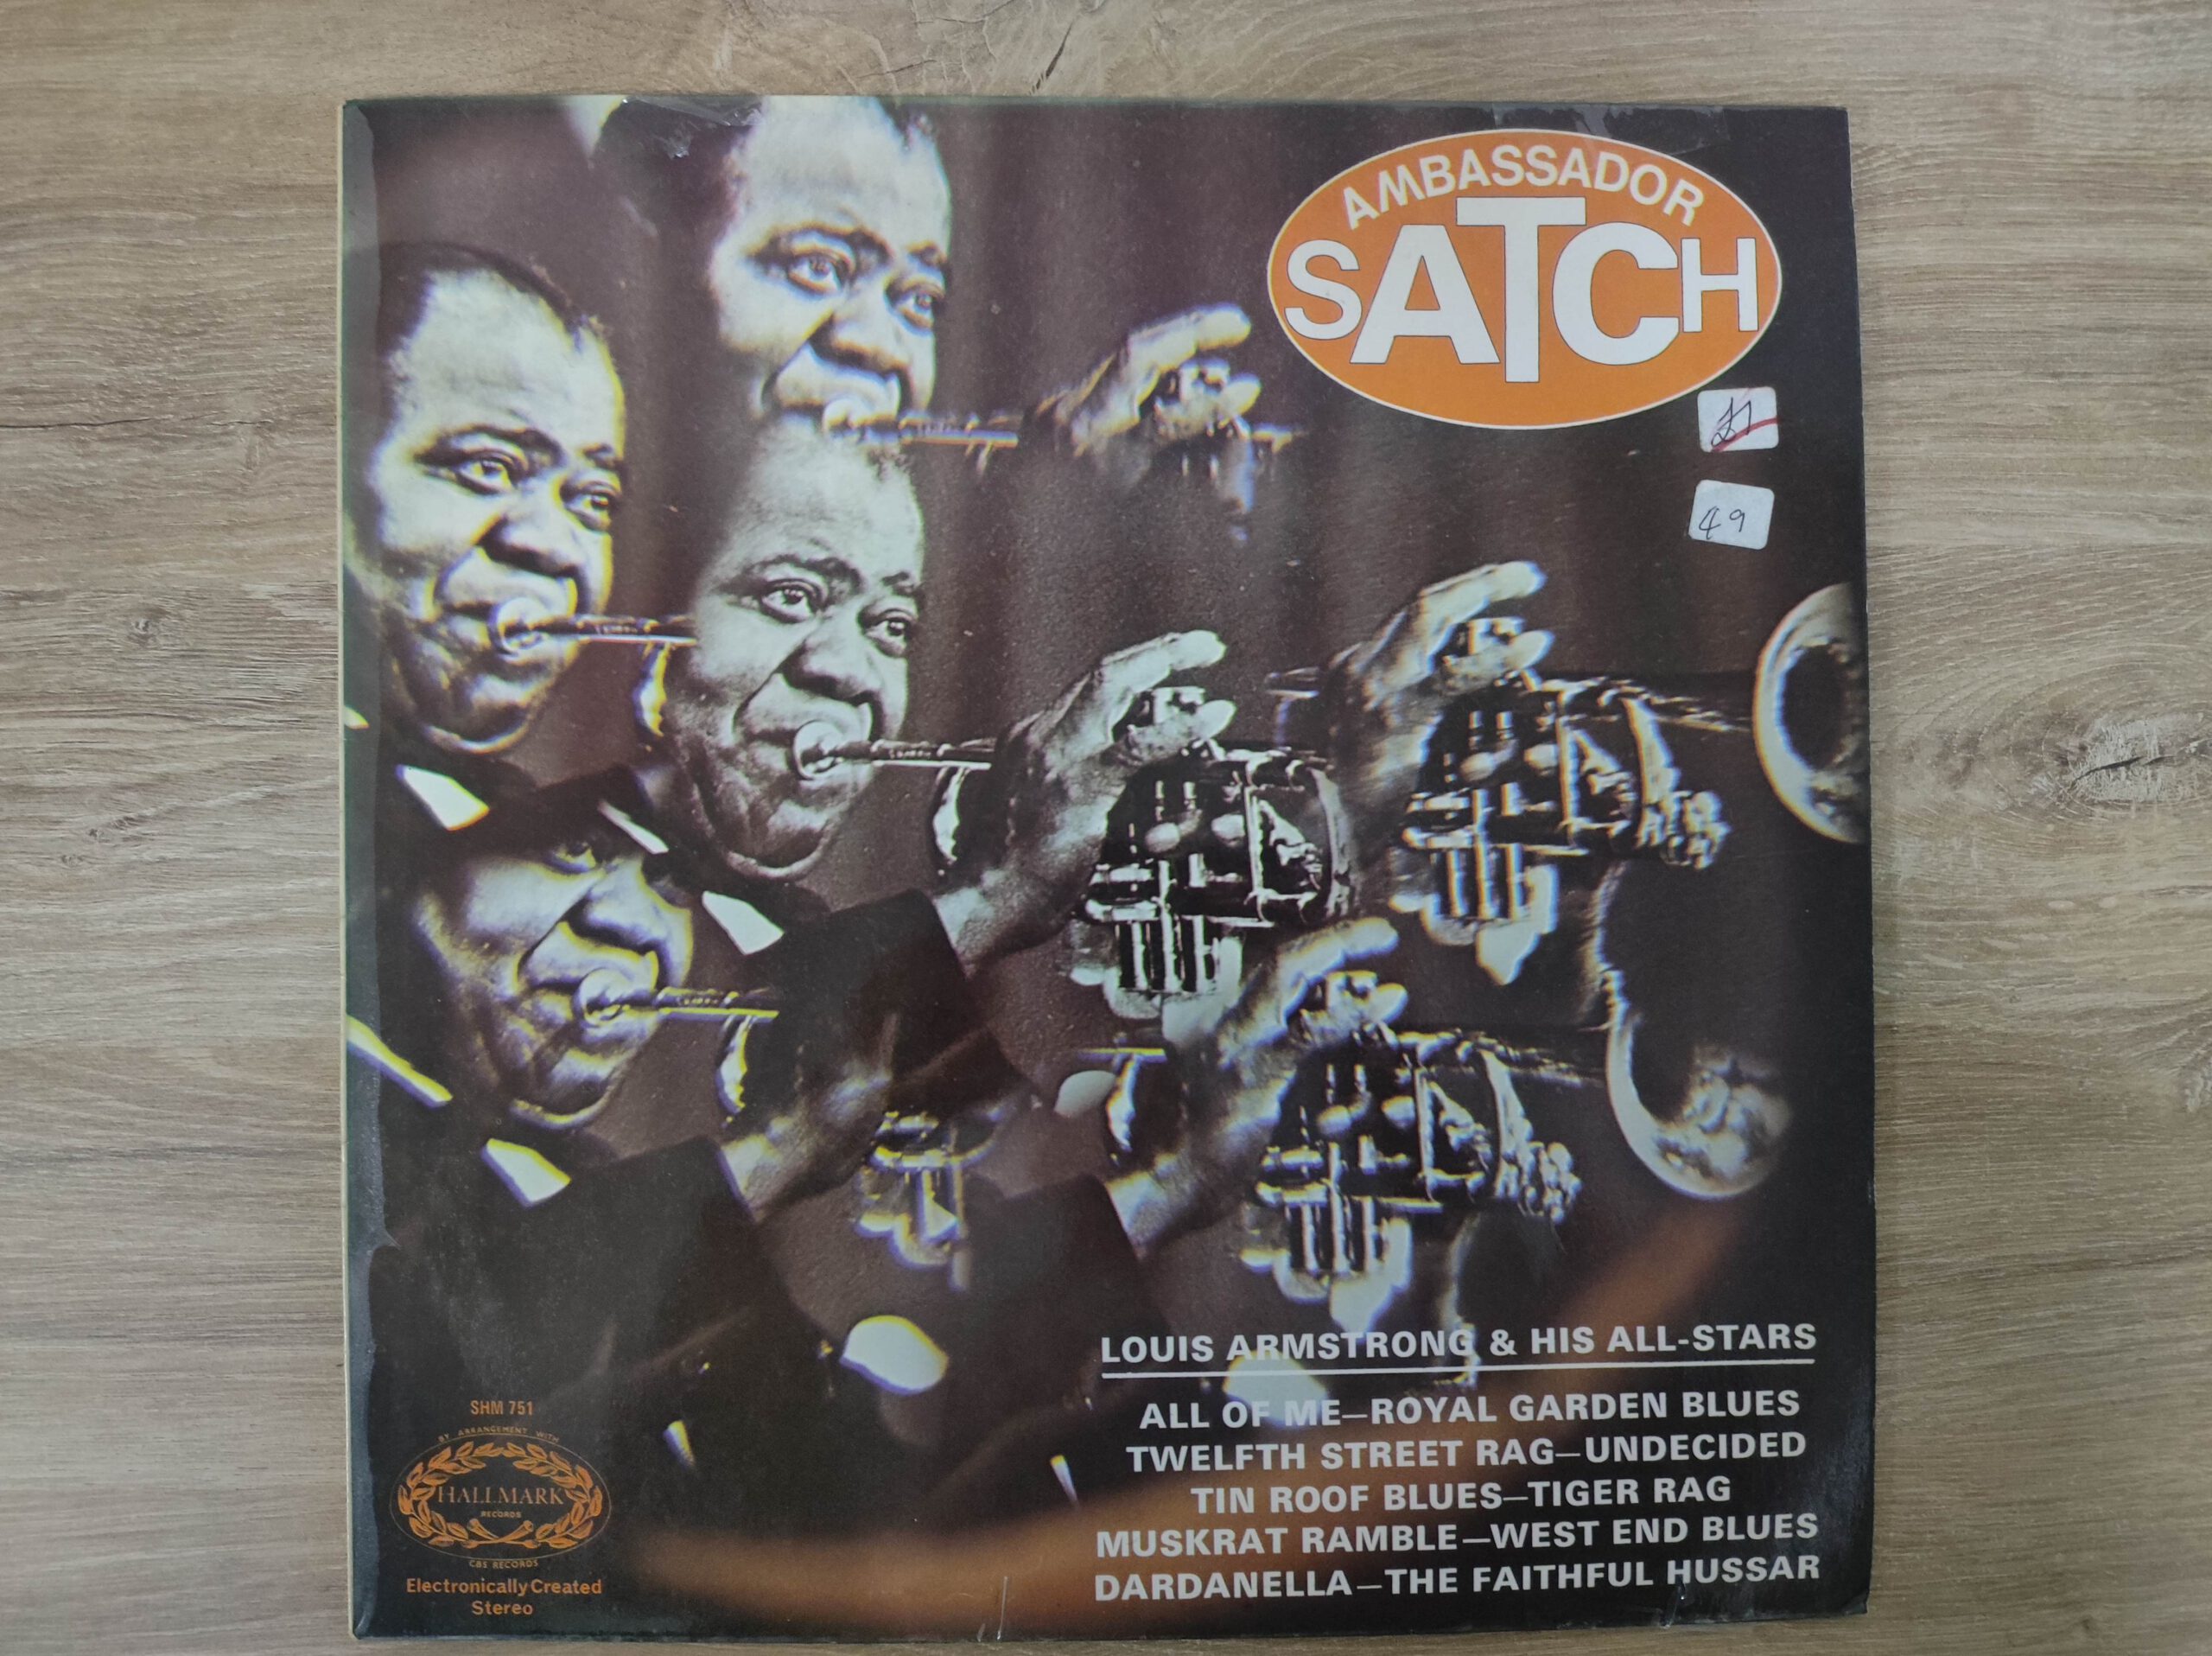 Louis Armstrong and His All-stars / Ambassador Satch 1956 